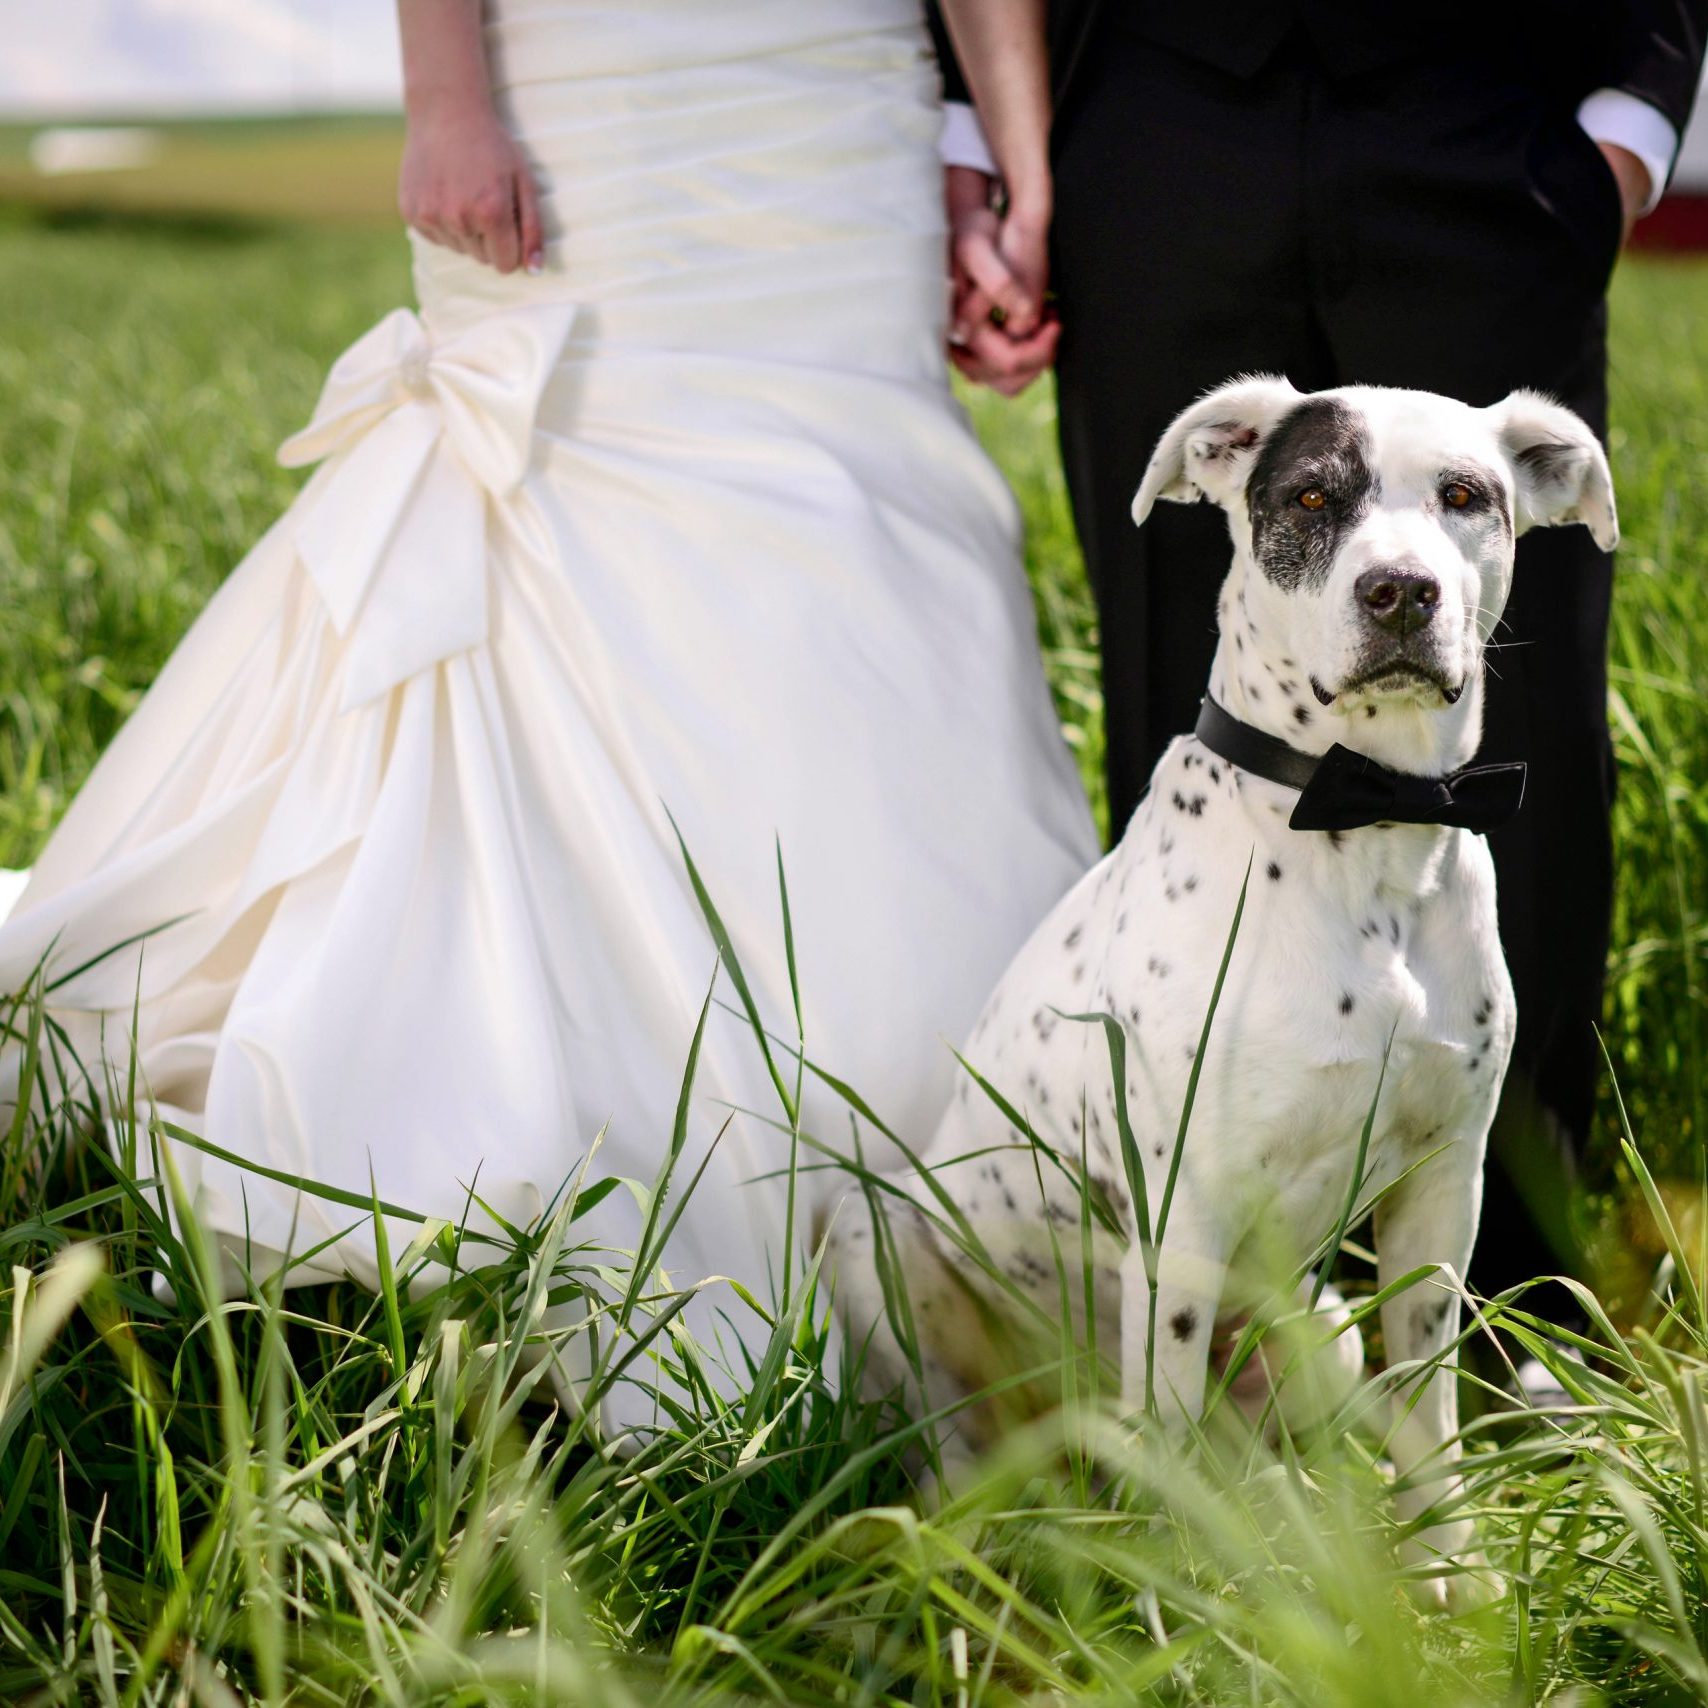 White and black spotted dog with bowtie in front of wedding couple in a field.